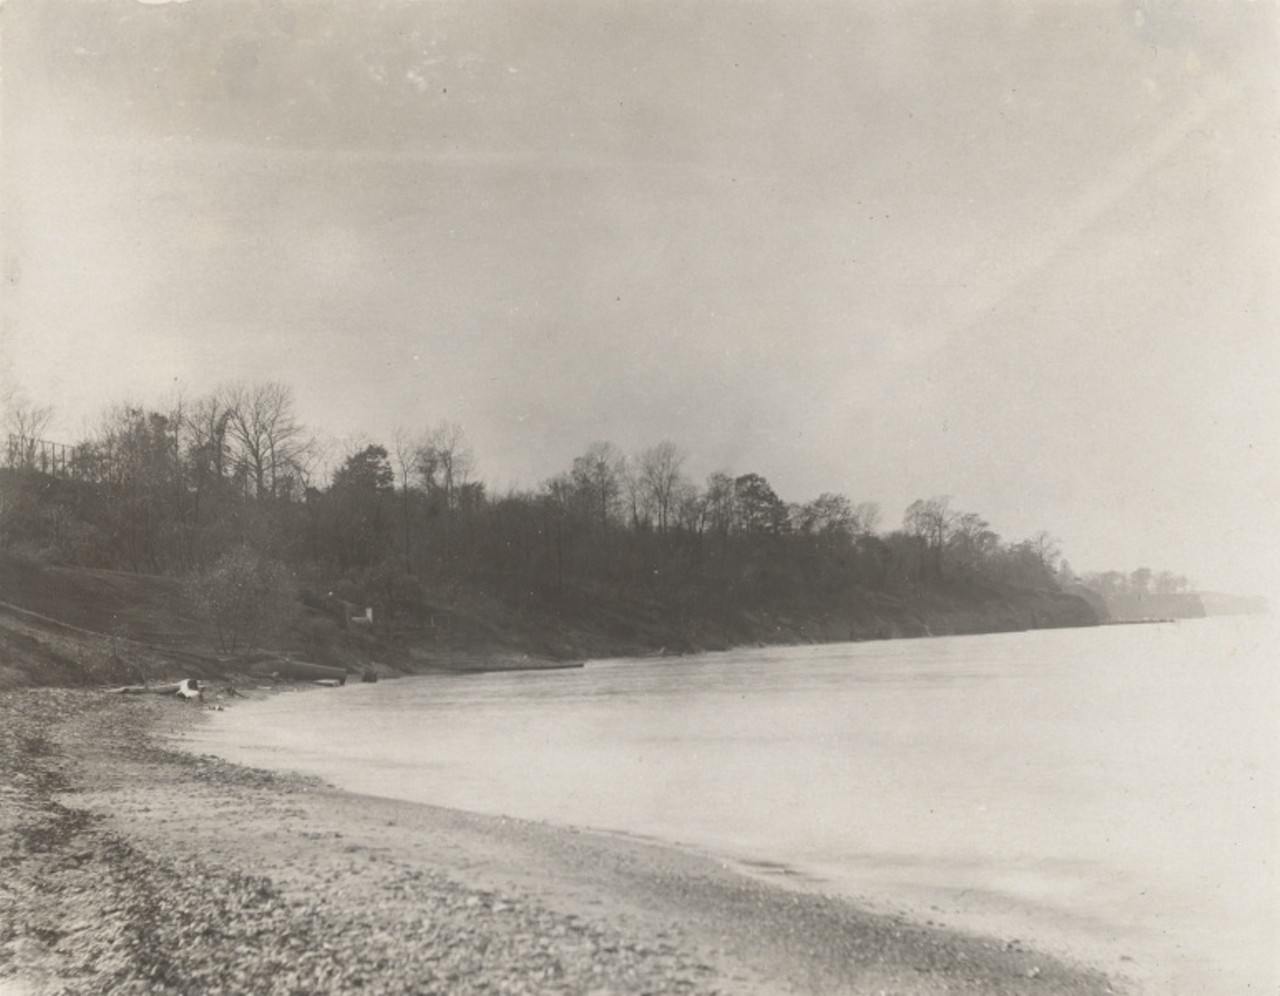 The bathing beach at Edgewater Park, facing west. c. 1905